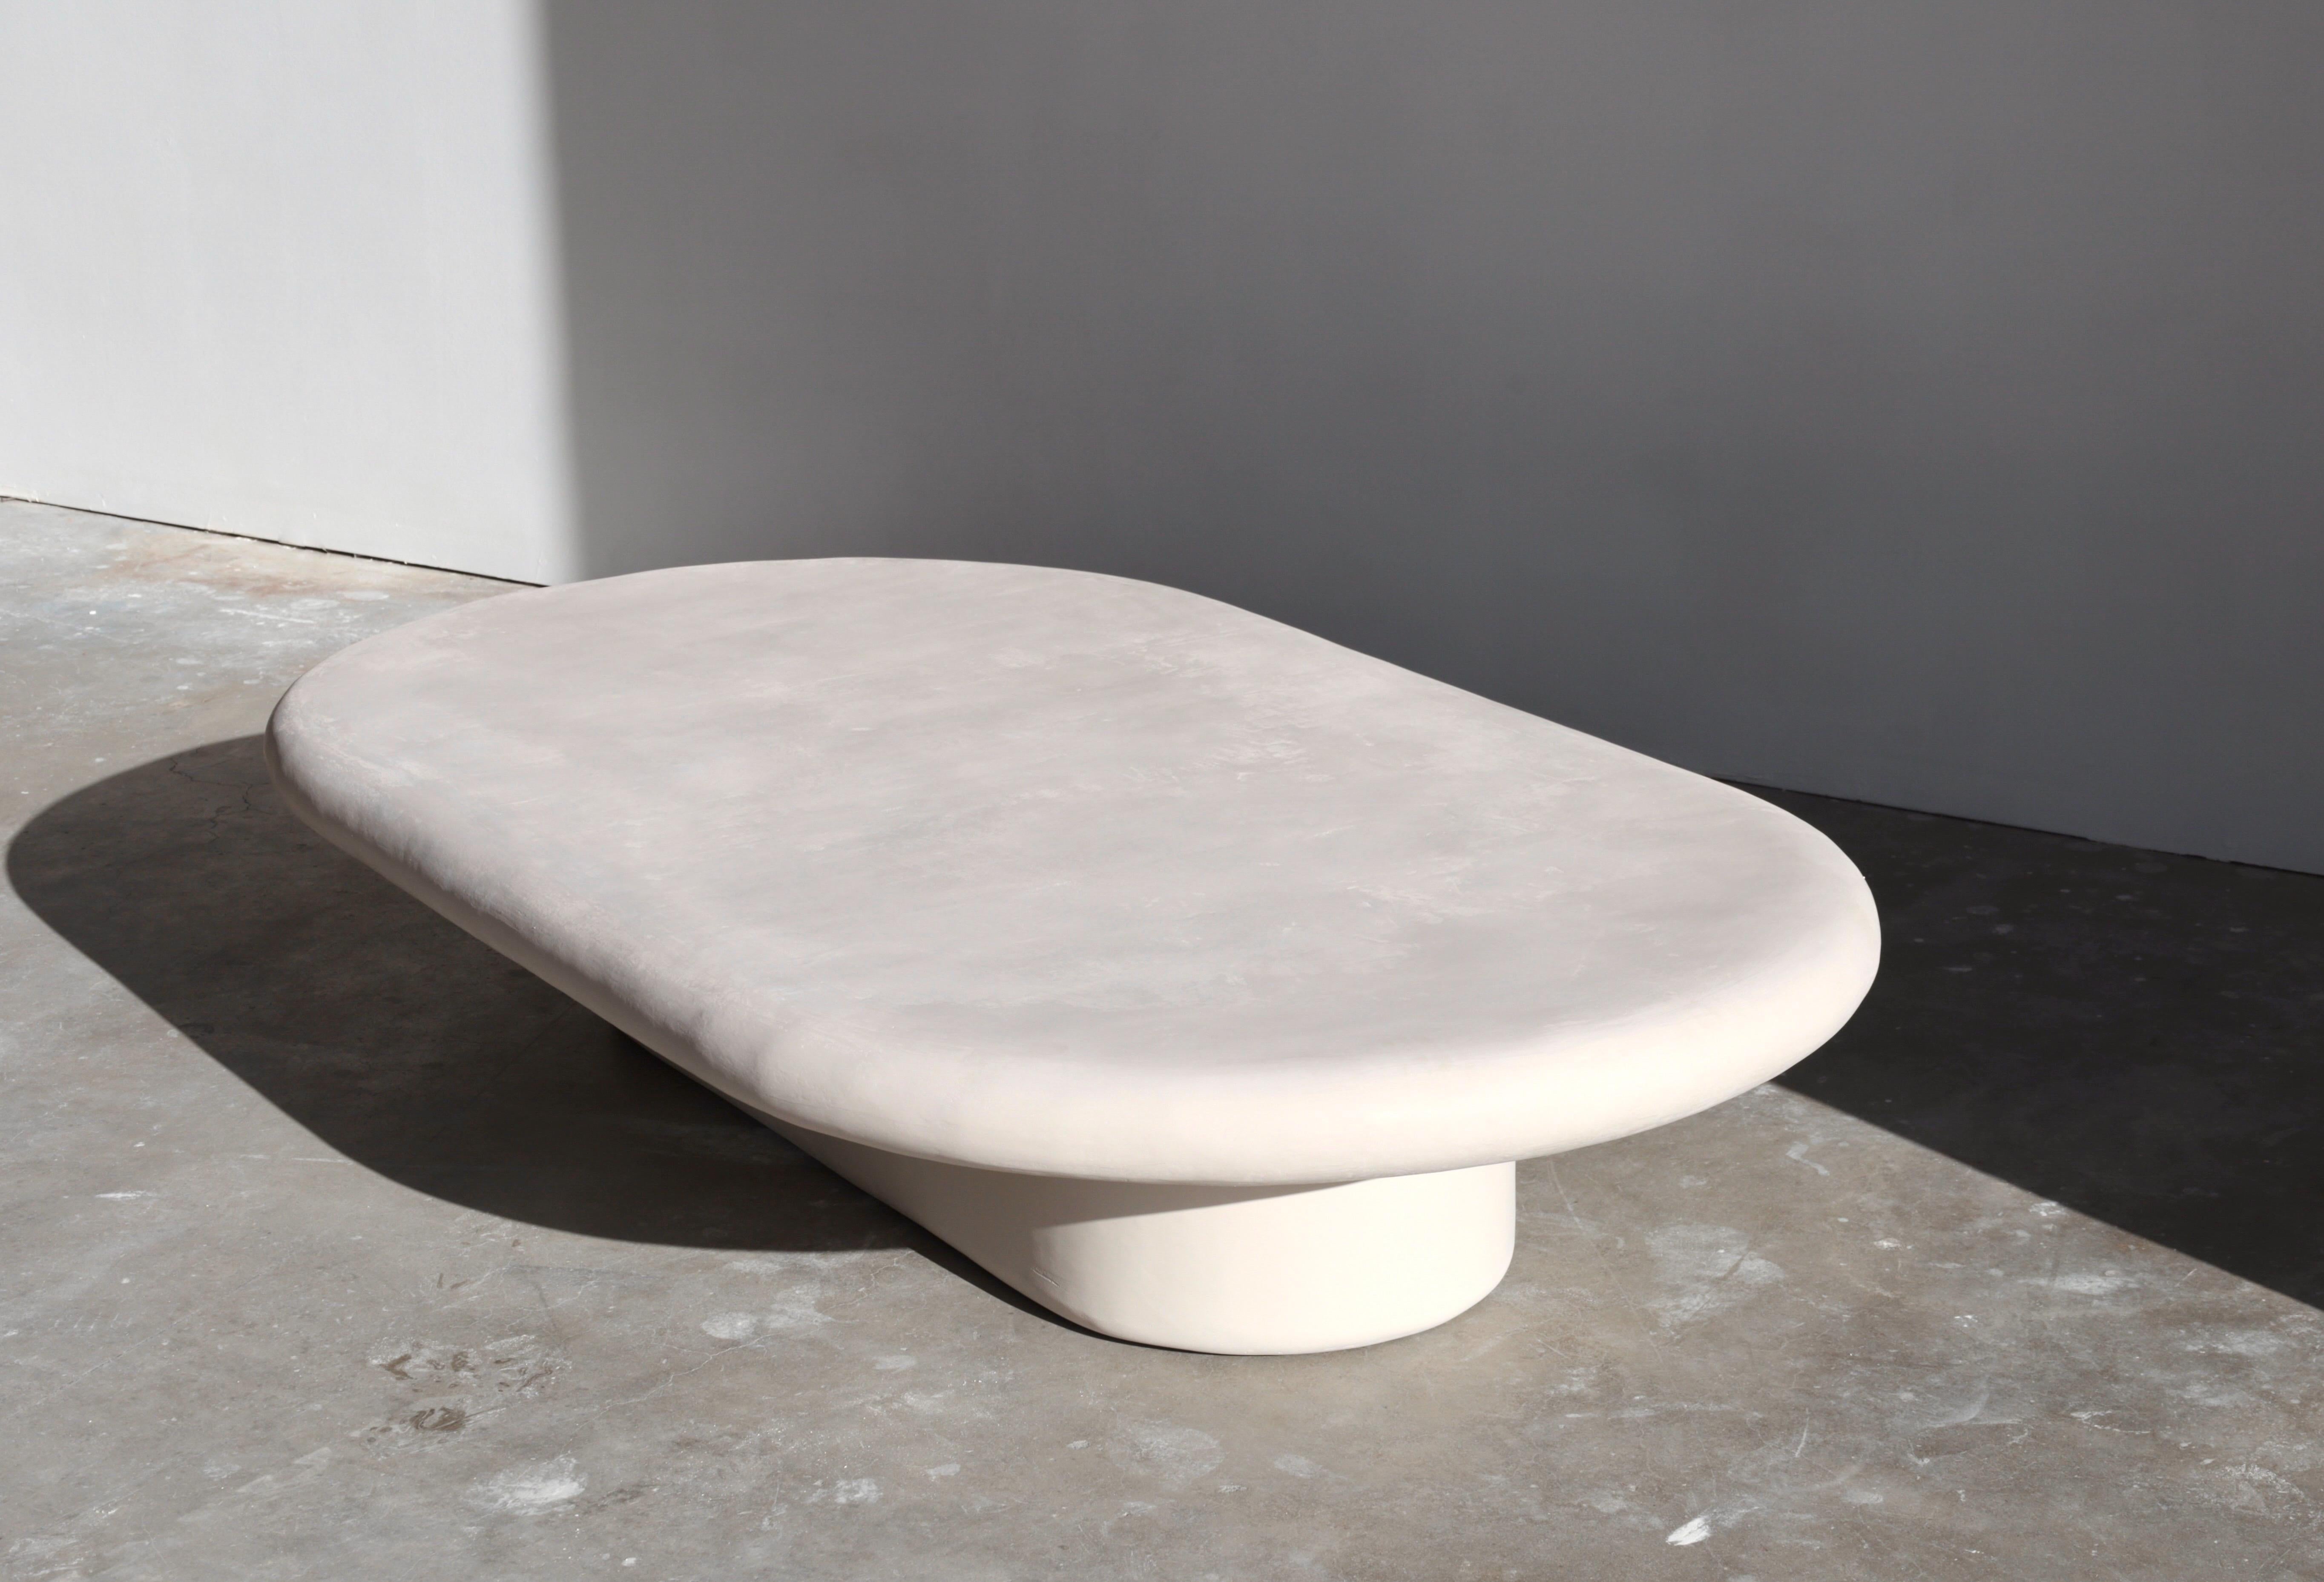 our most popular table, simple and sculptural statement piece. featured in light gobi color.

each öken house studio piece is handmade & made to order by a small team of plaster artisans and we try to utilize local vendors as much as possible. 

we